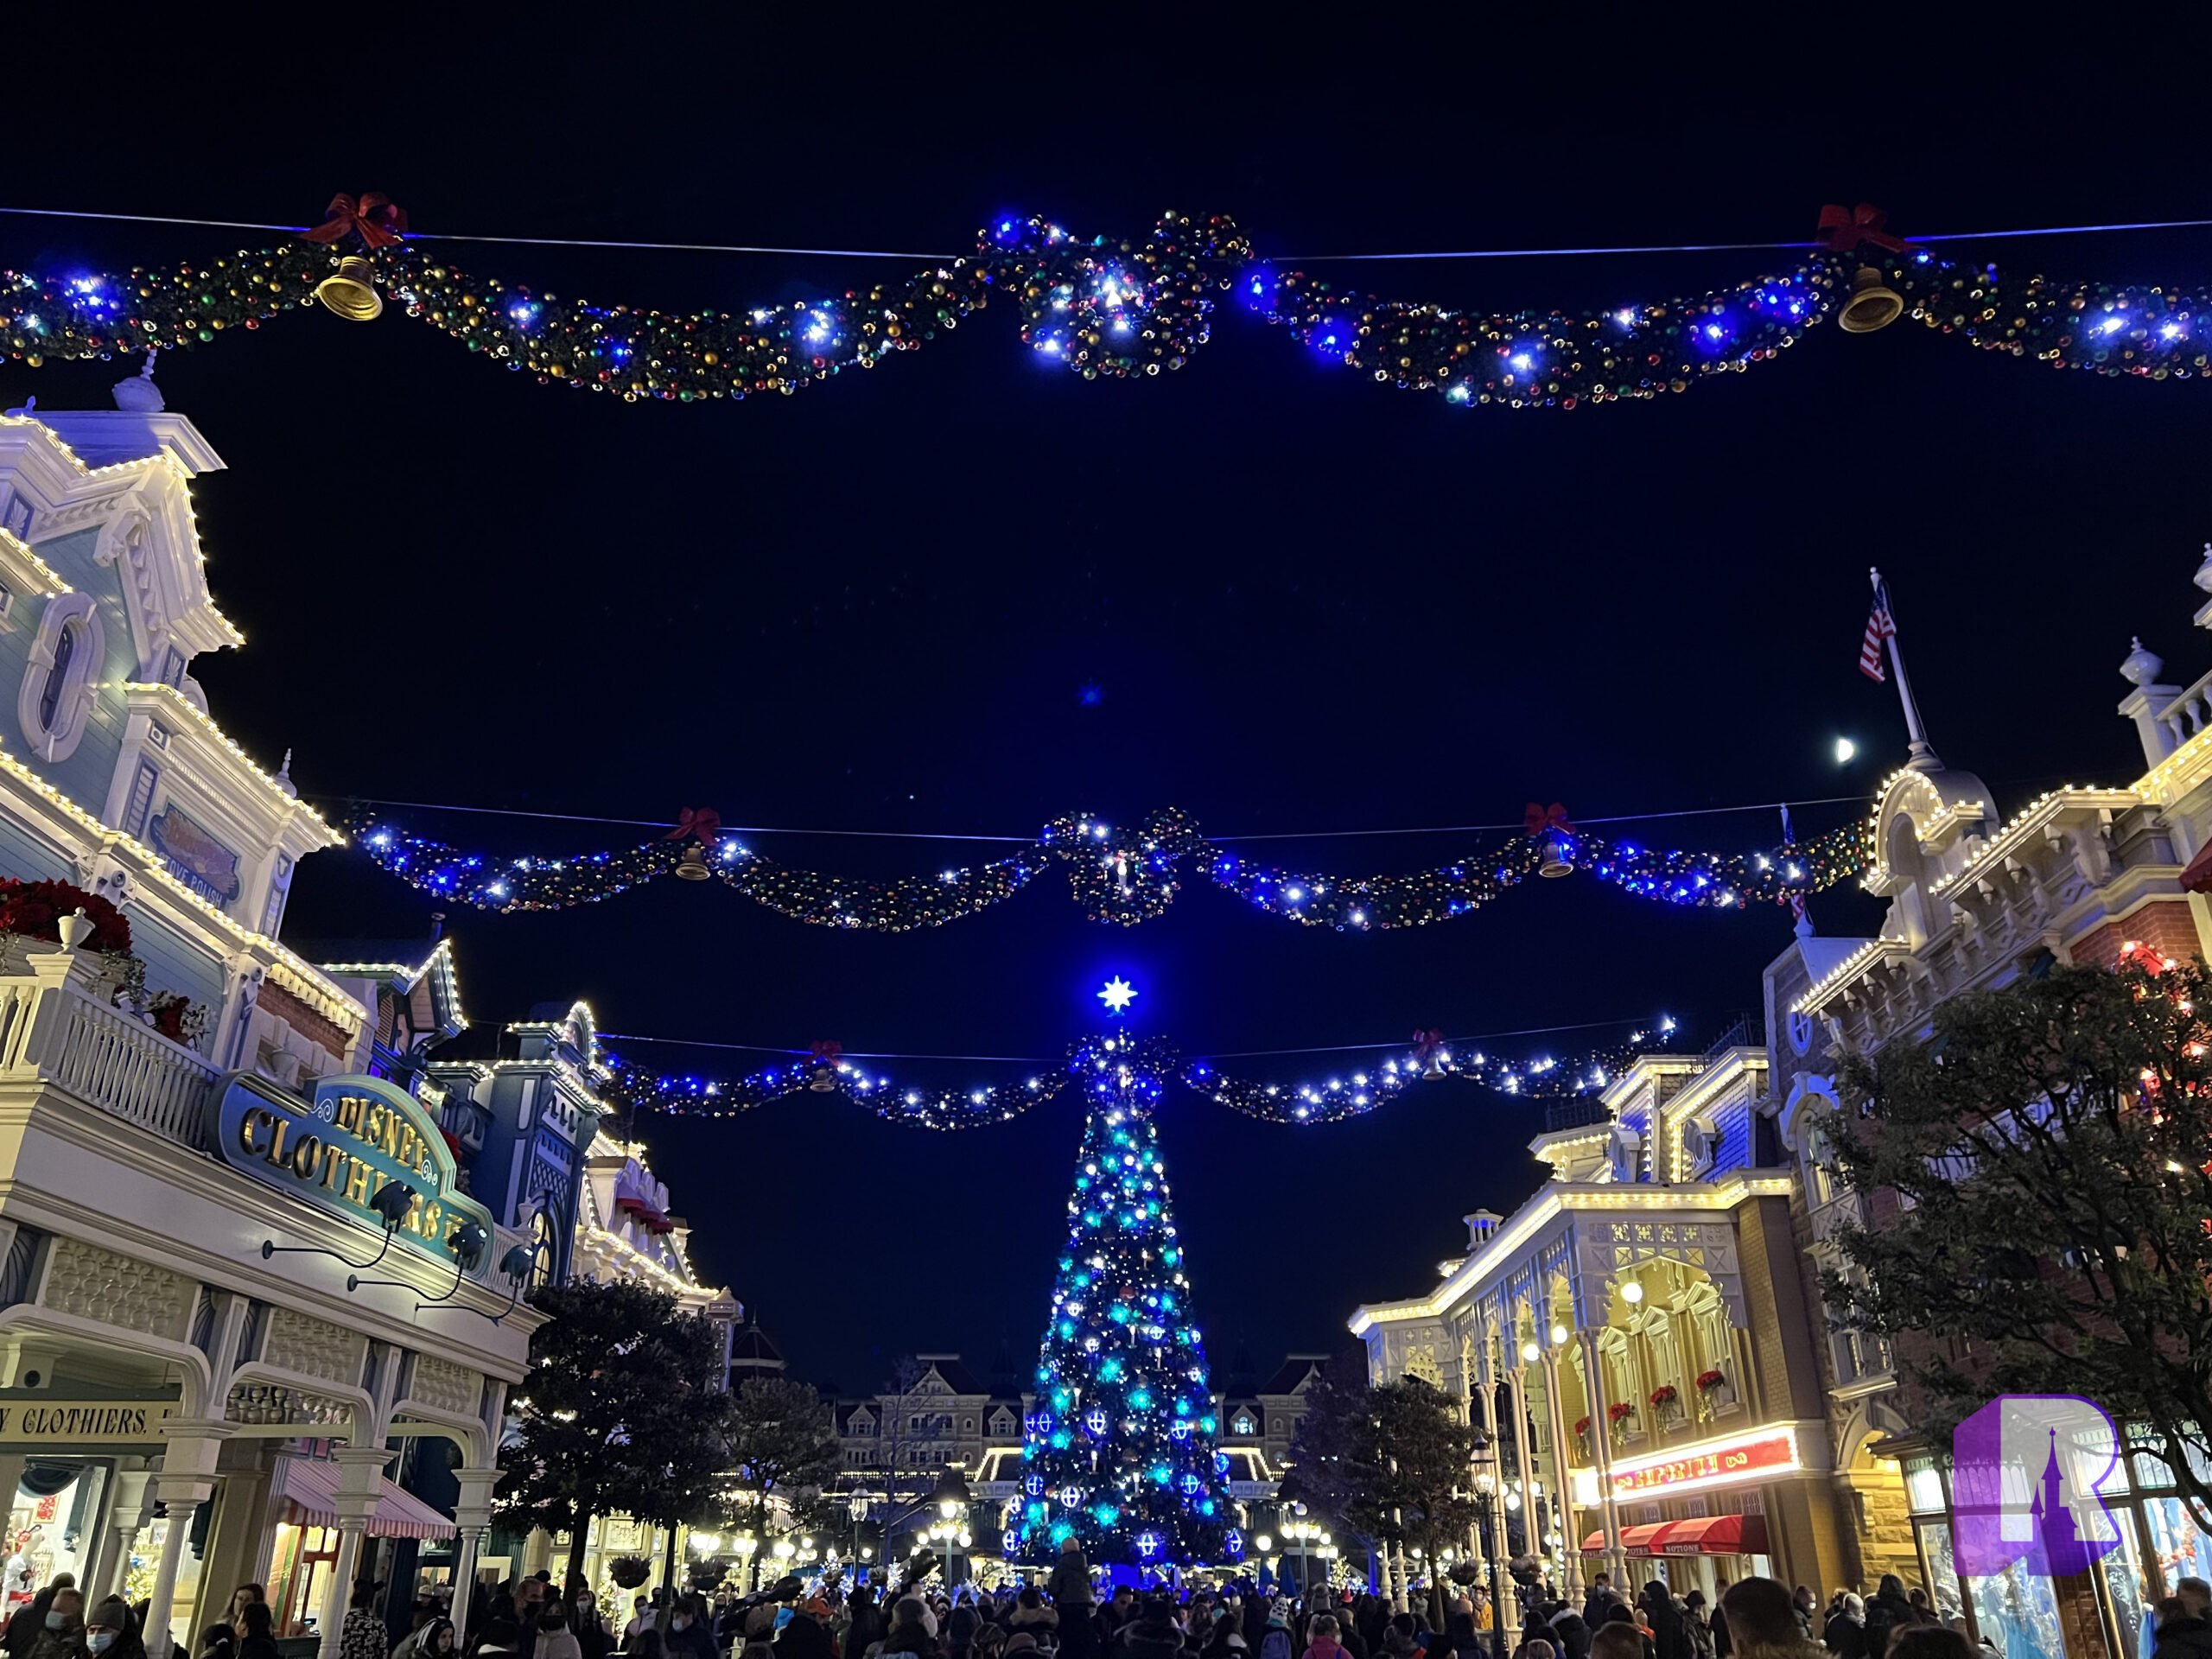 Disneyland Paris Photo Collection: Castle, Christmas Decorations and More